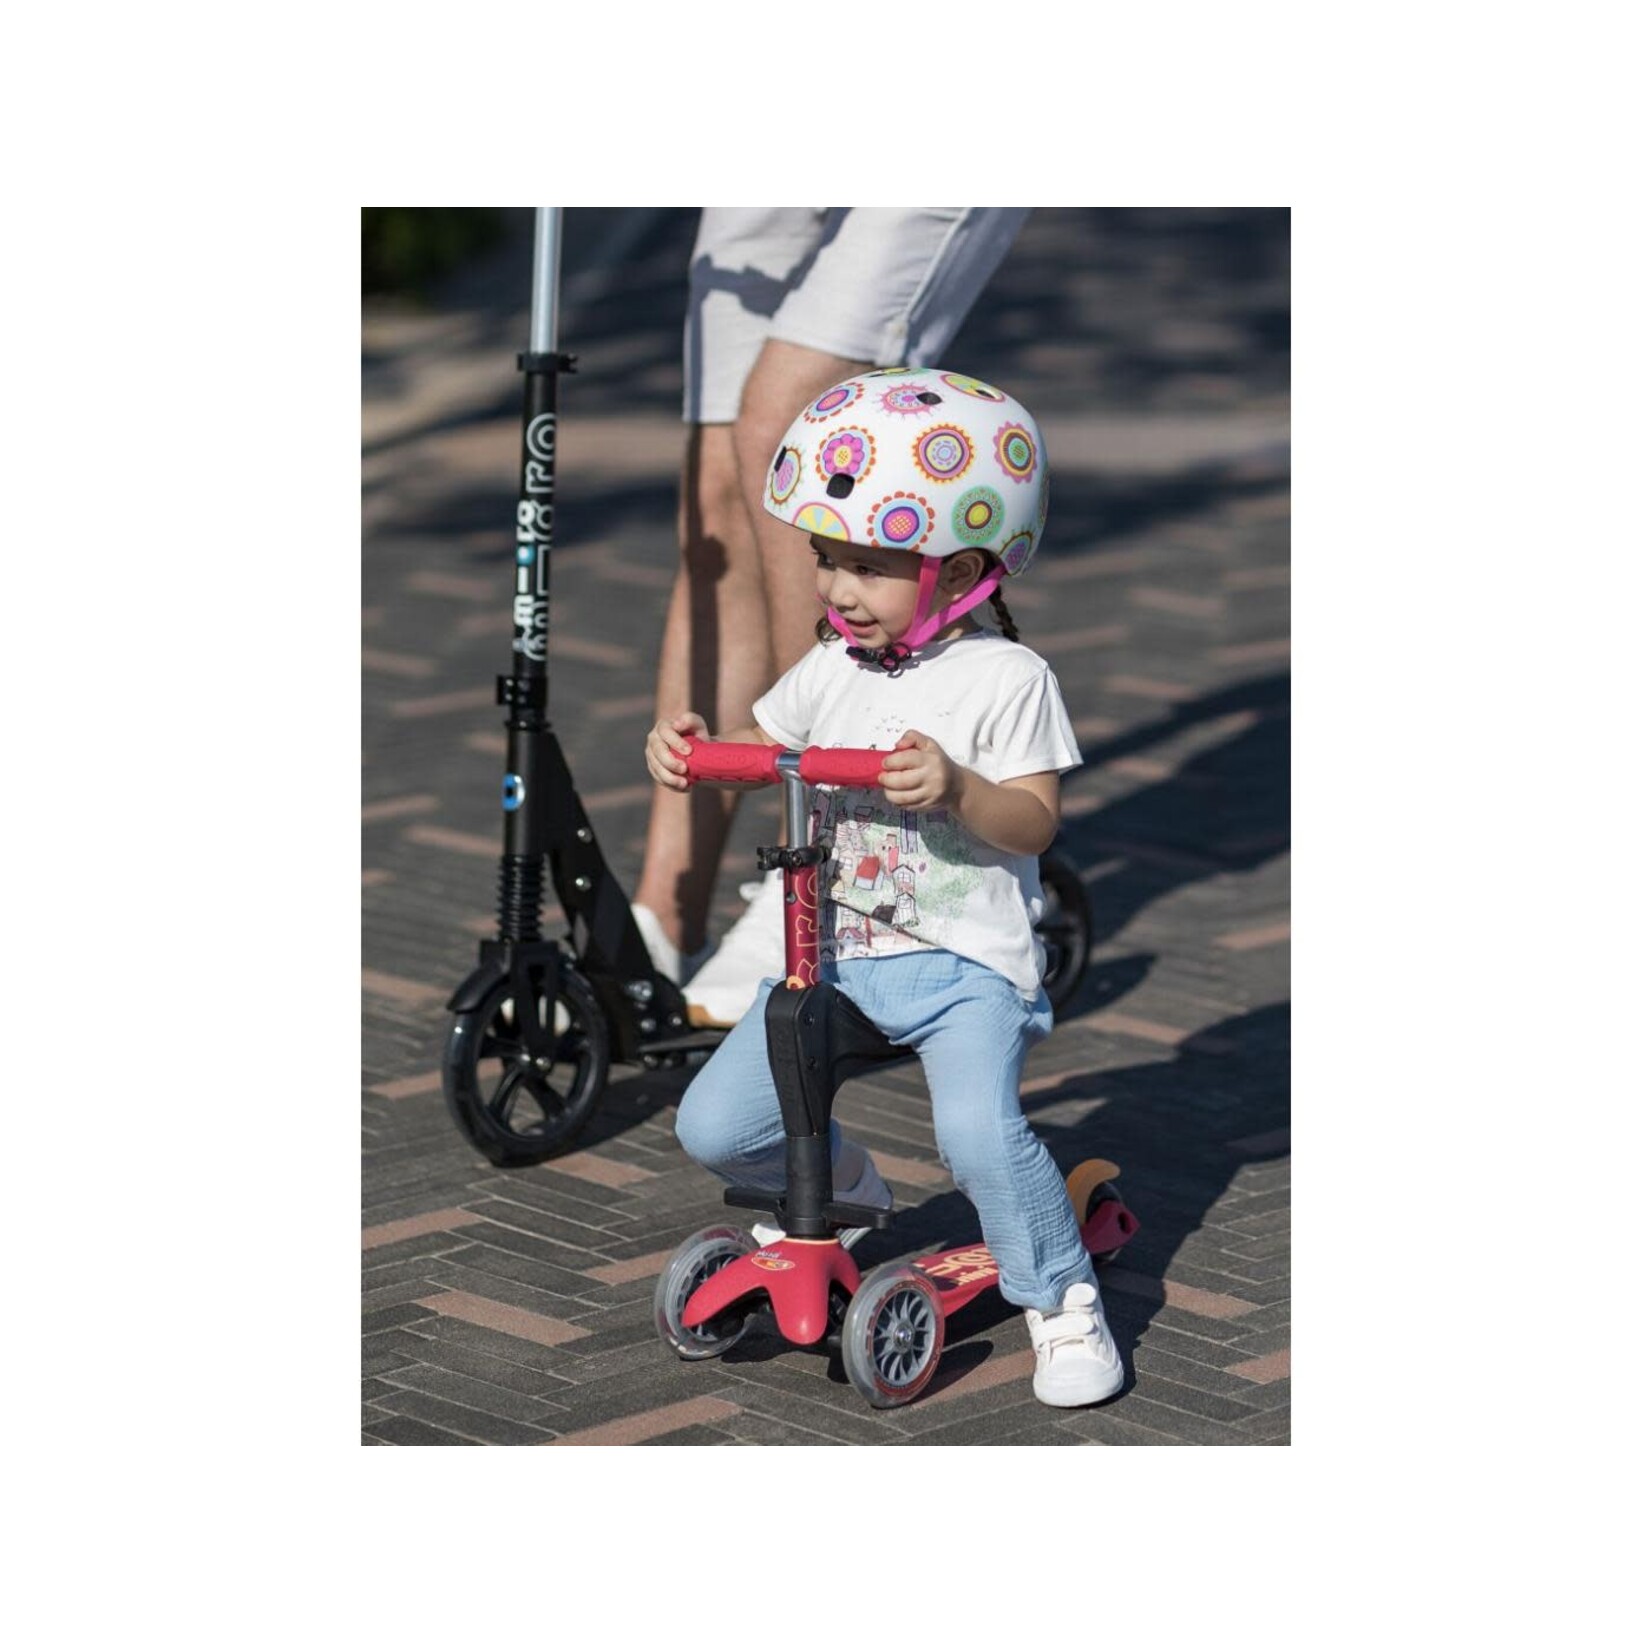 Protections trottinette enfant - Micro Mobility